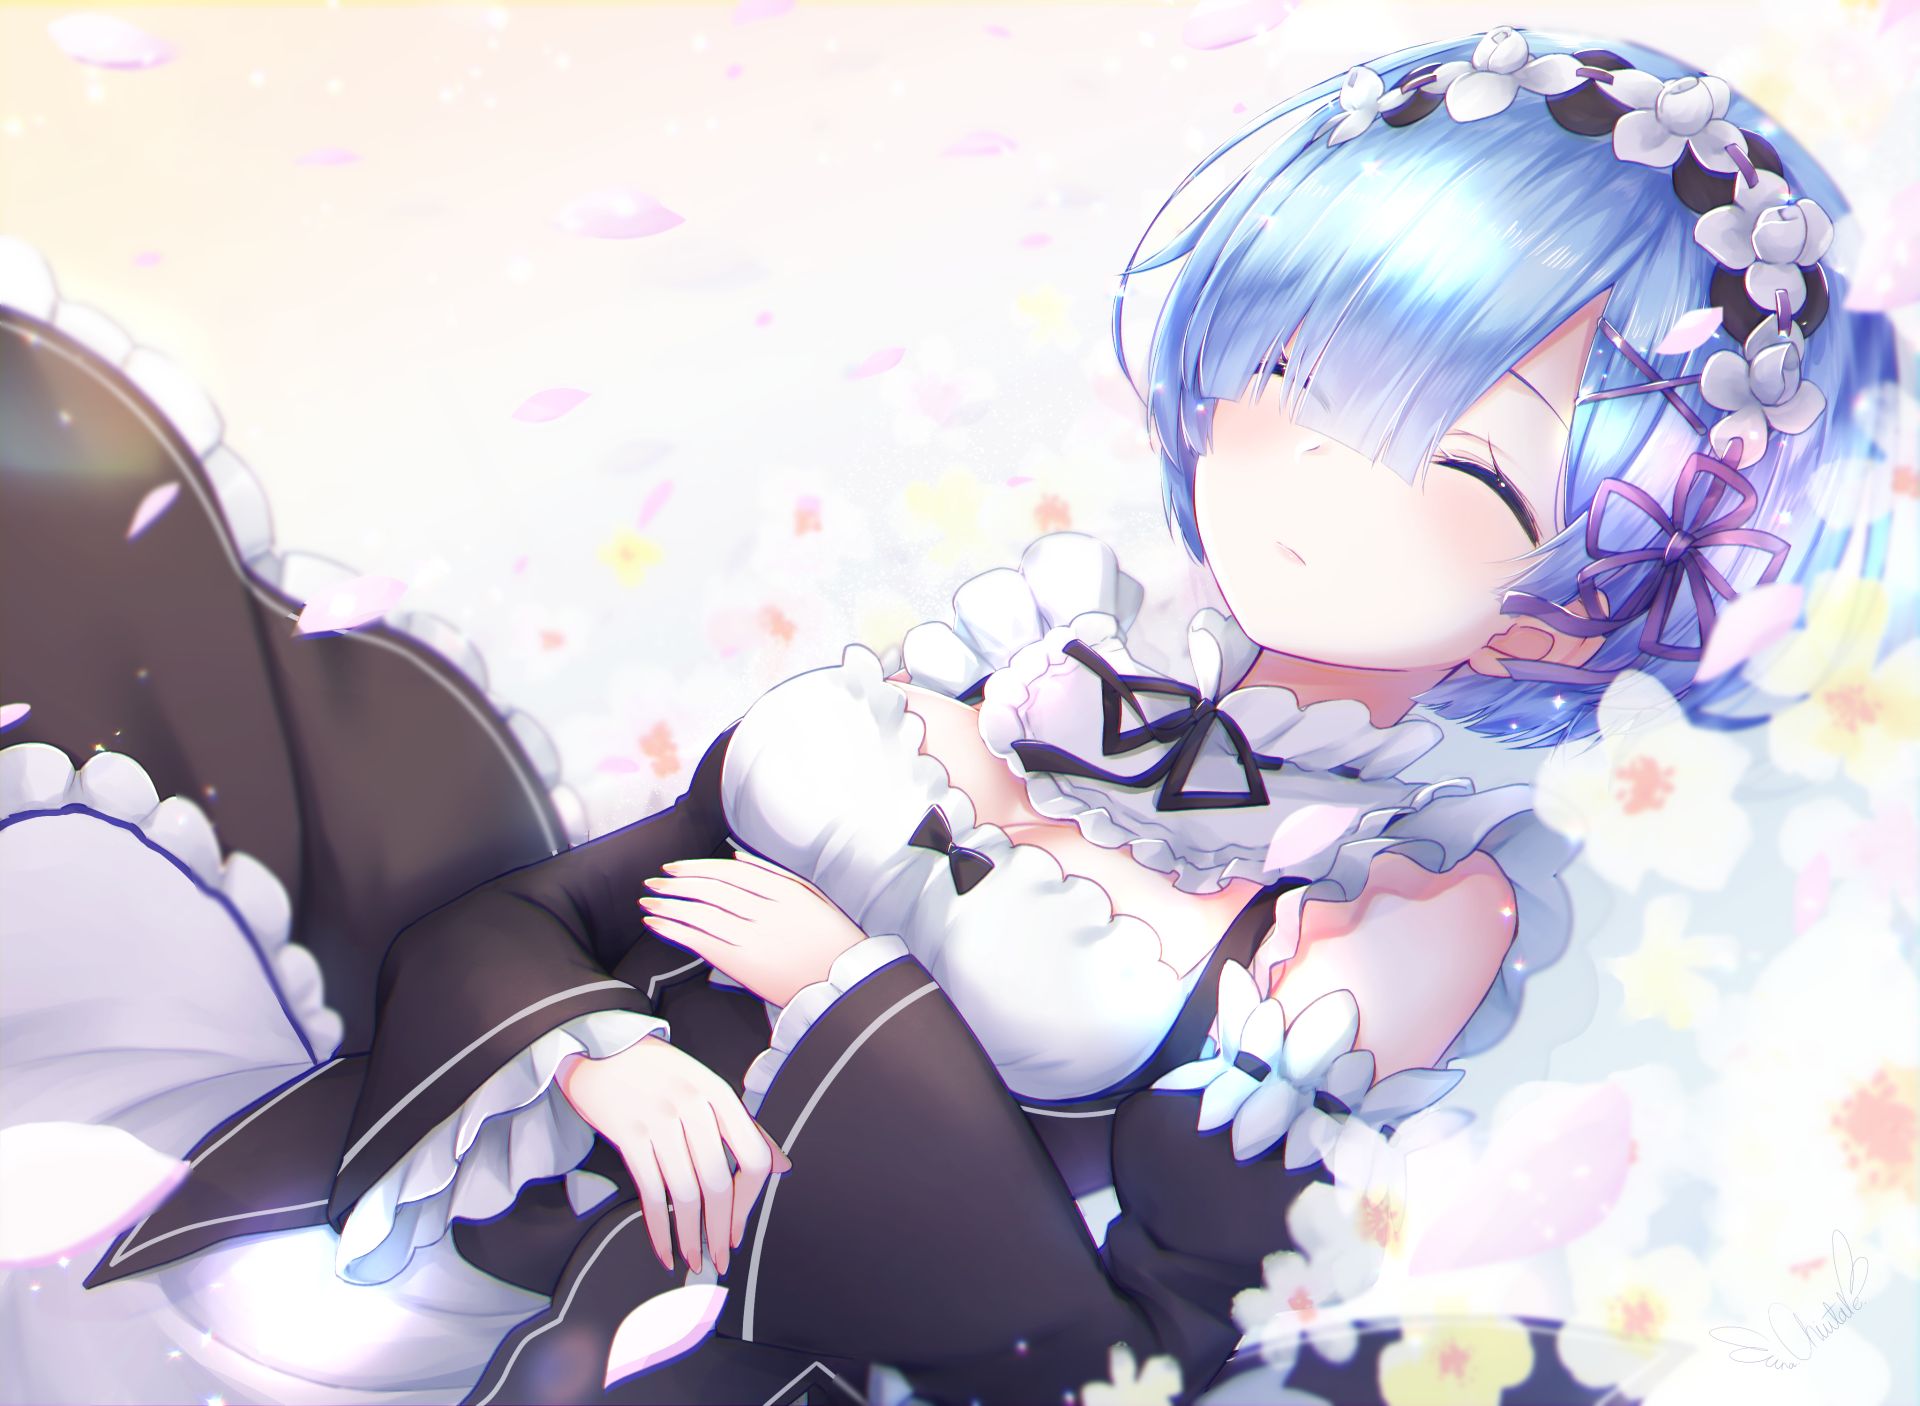 Rem a blue haired maid from the anime re:zero